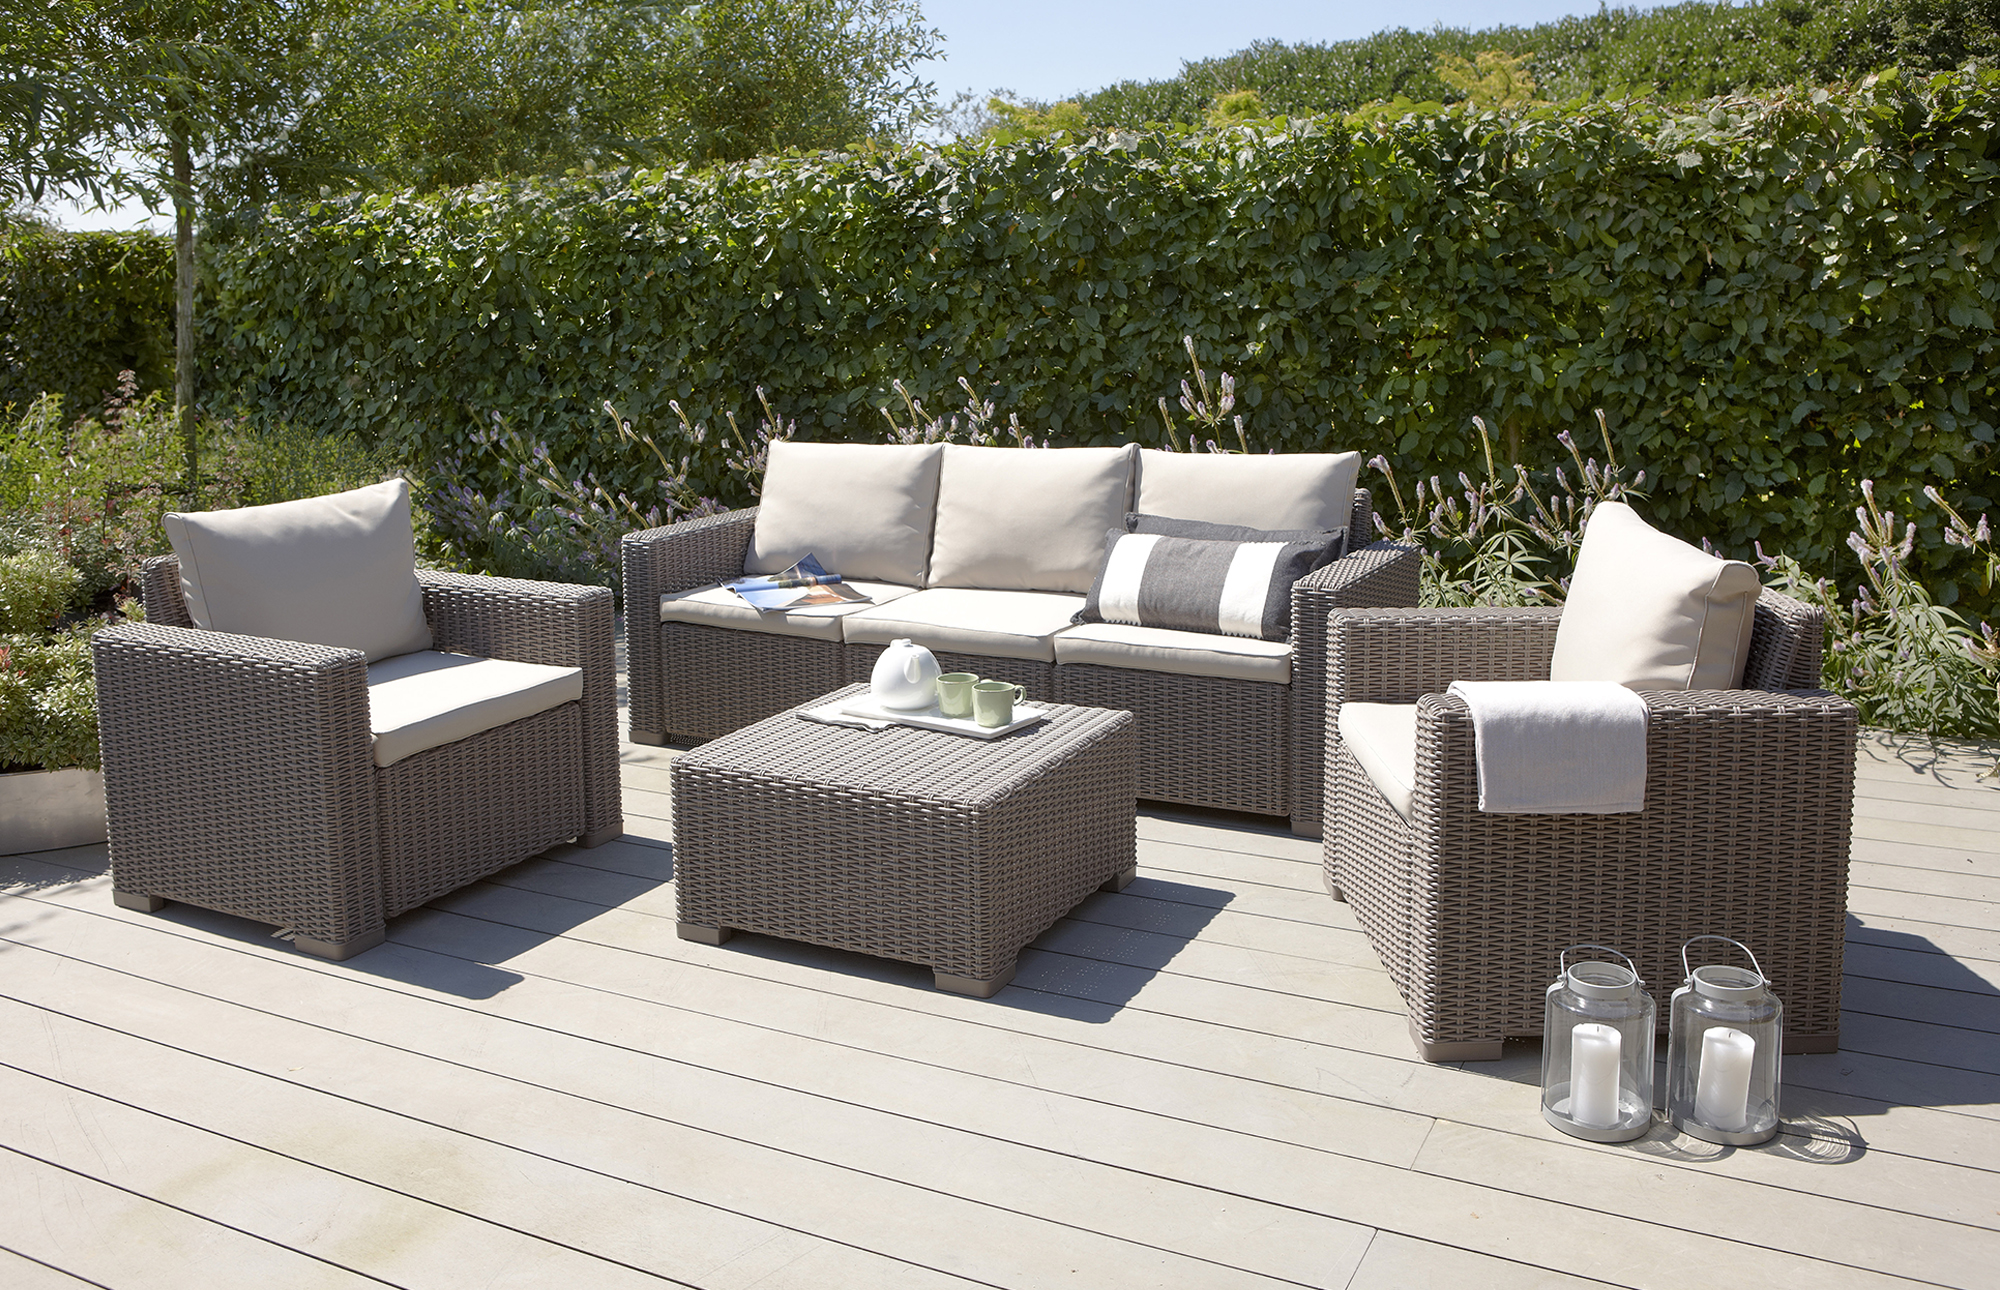 outdoor wicker furniture sets photo - 9